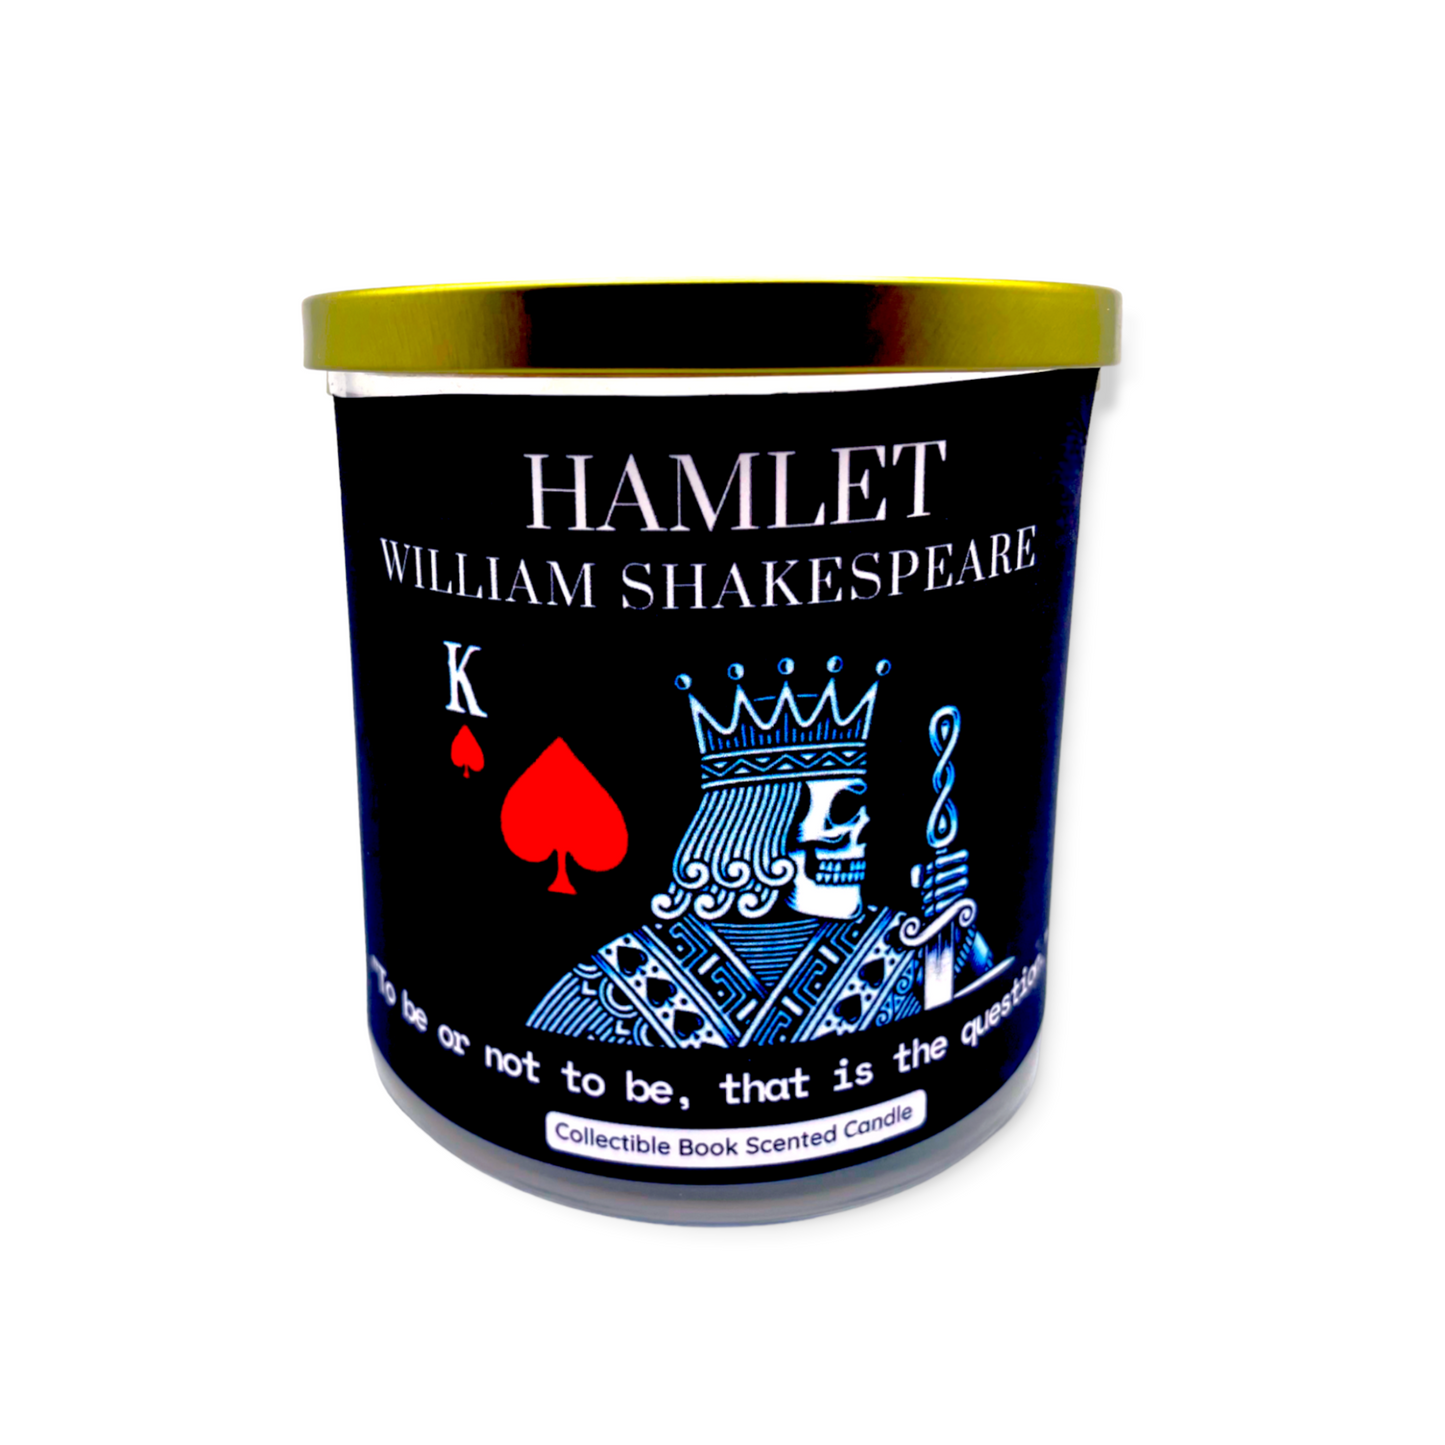 Hamlet by William Shakespeare Candle| Literature Candle